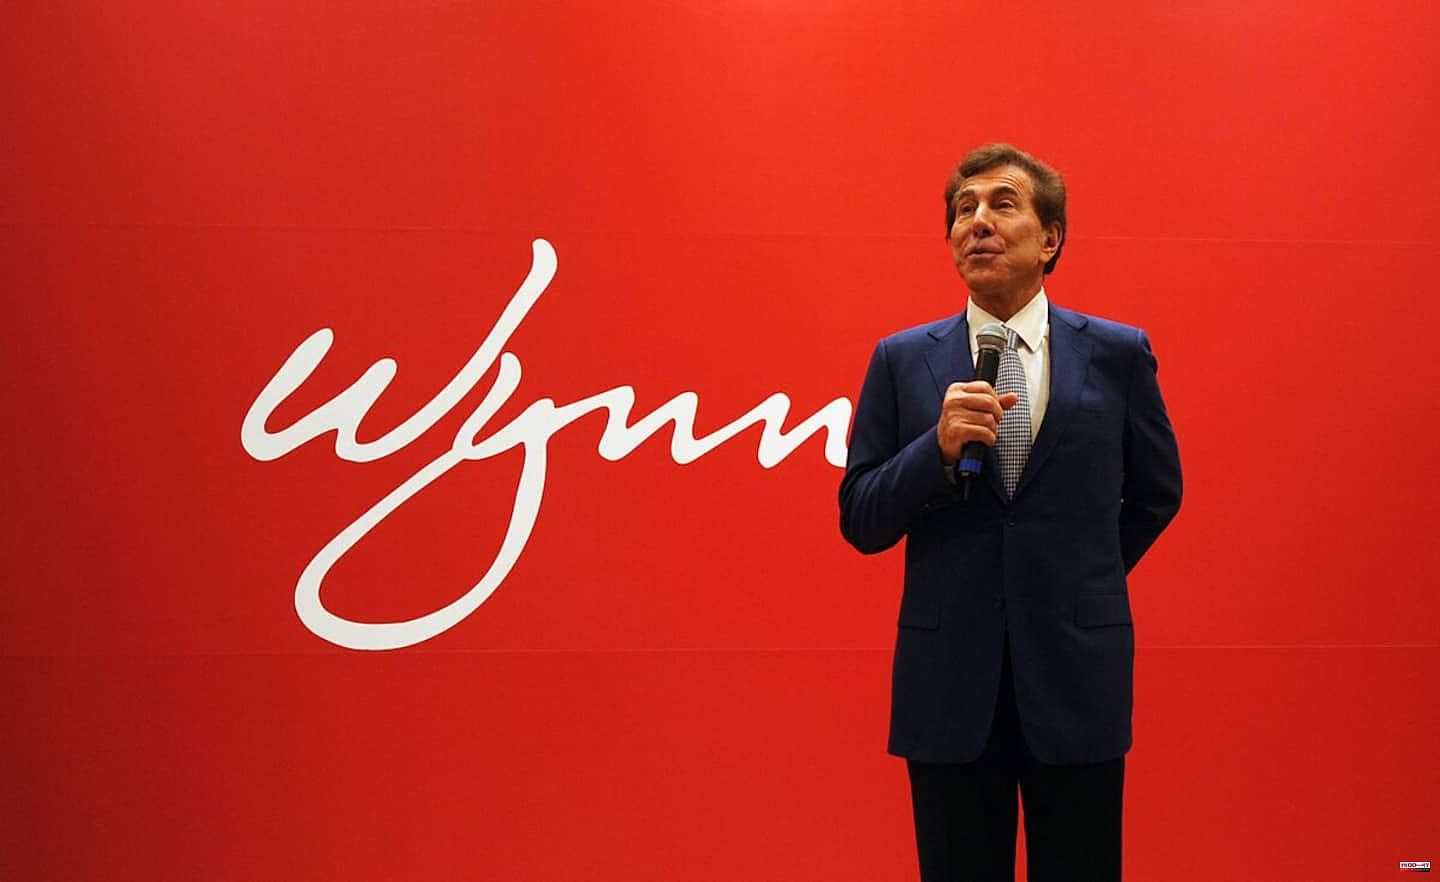 US casino tycoon Steve Wynn sued for acting as China 'agent'